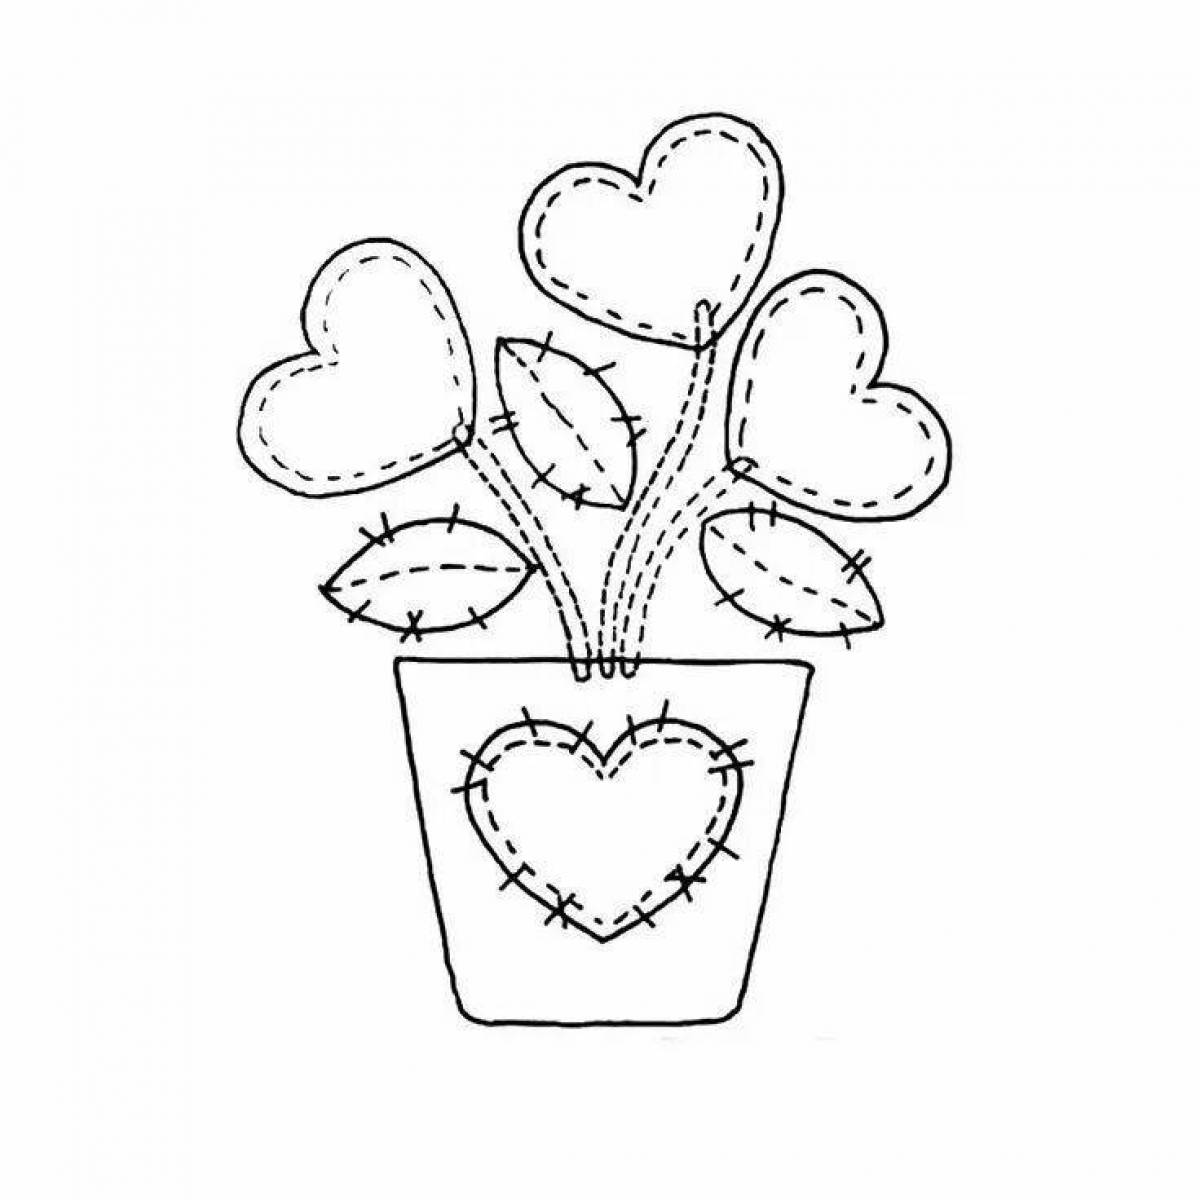 Animated flower pot coloring page